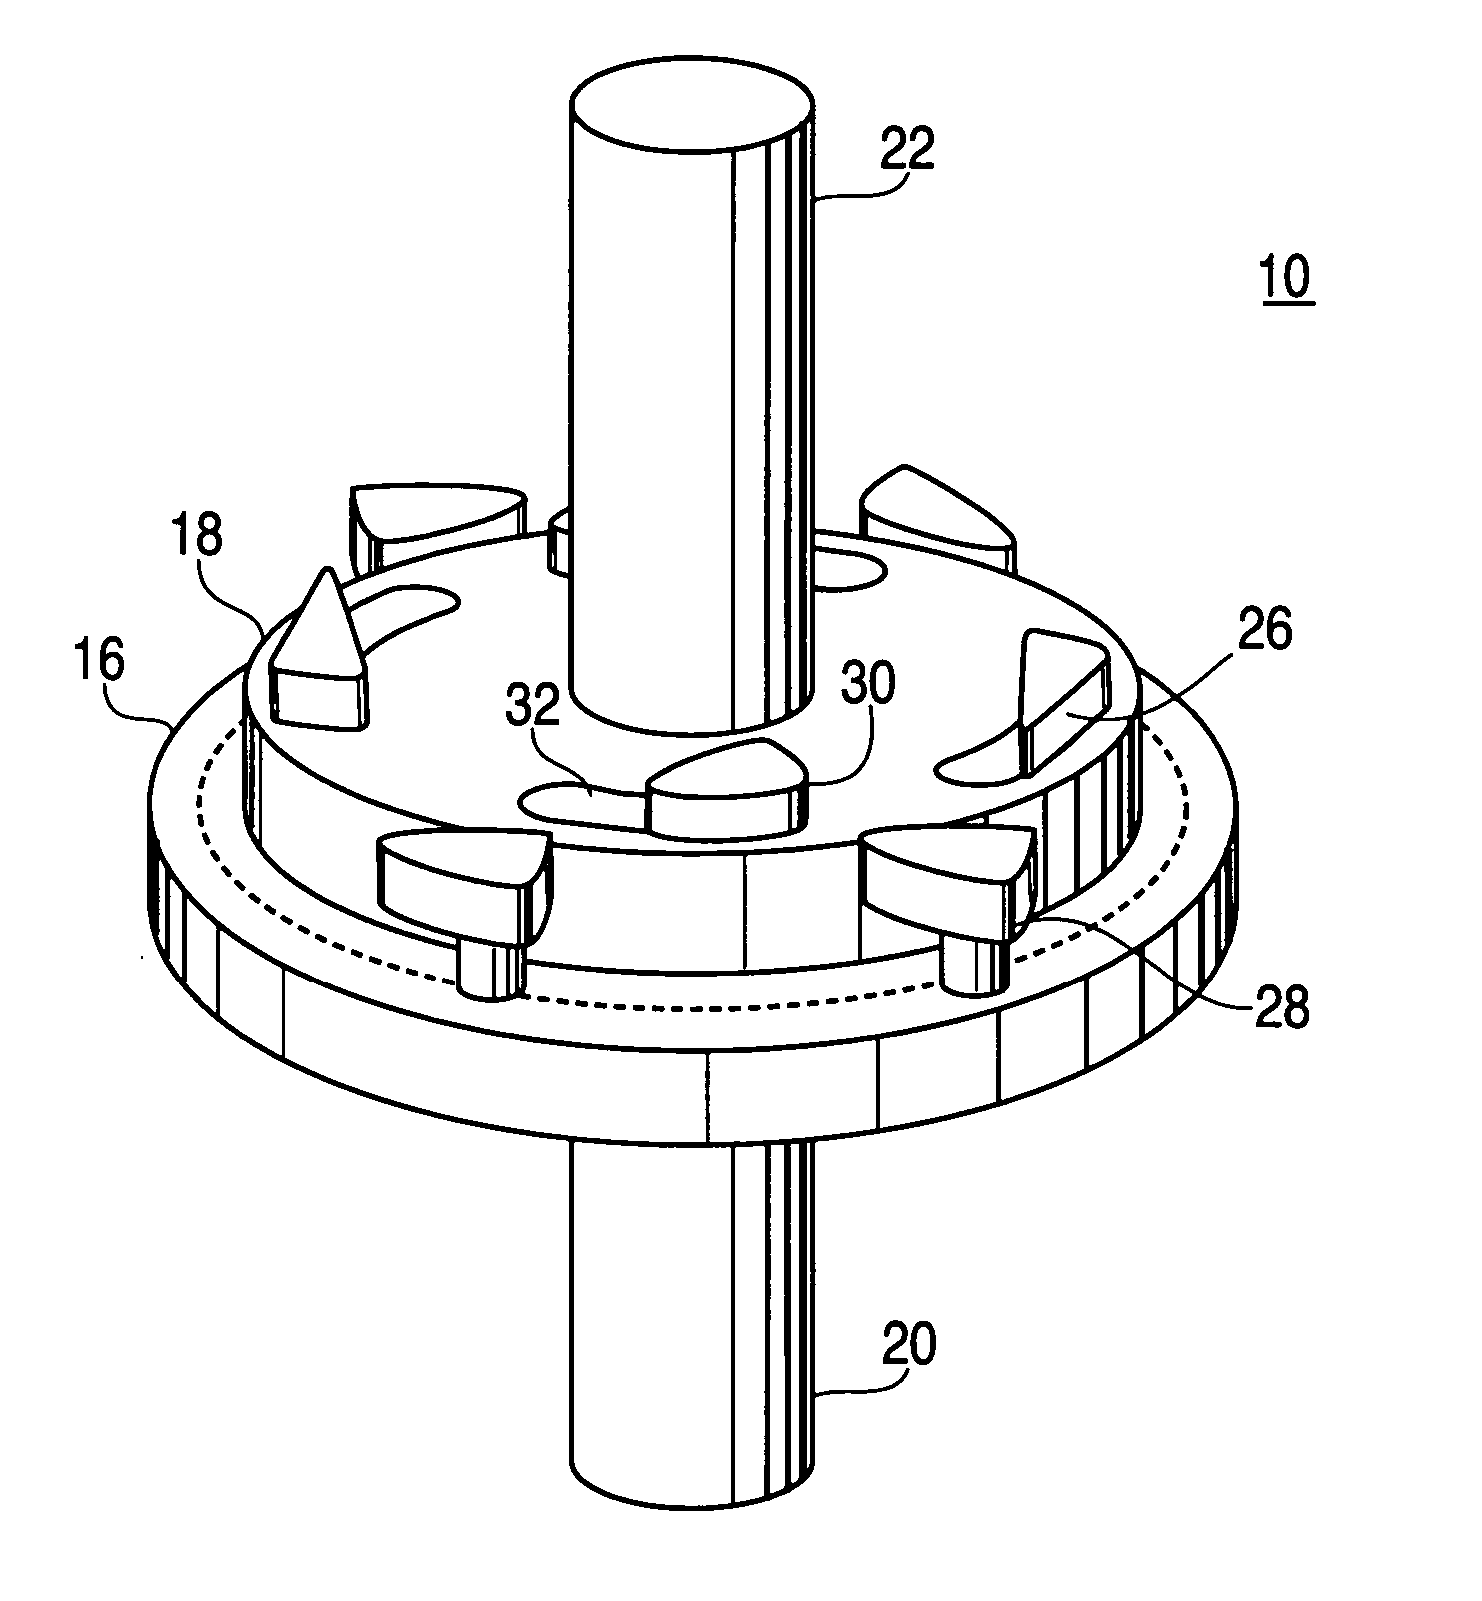 Coupling assembly and method for connecting and disconnecting a shaft assembly